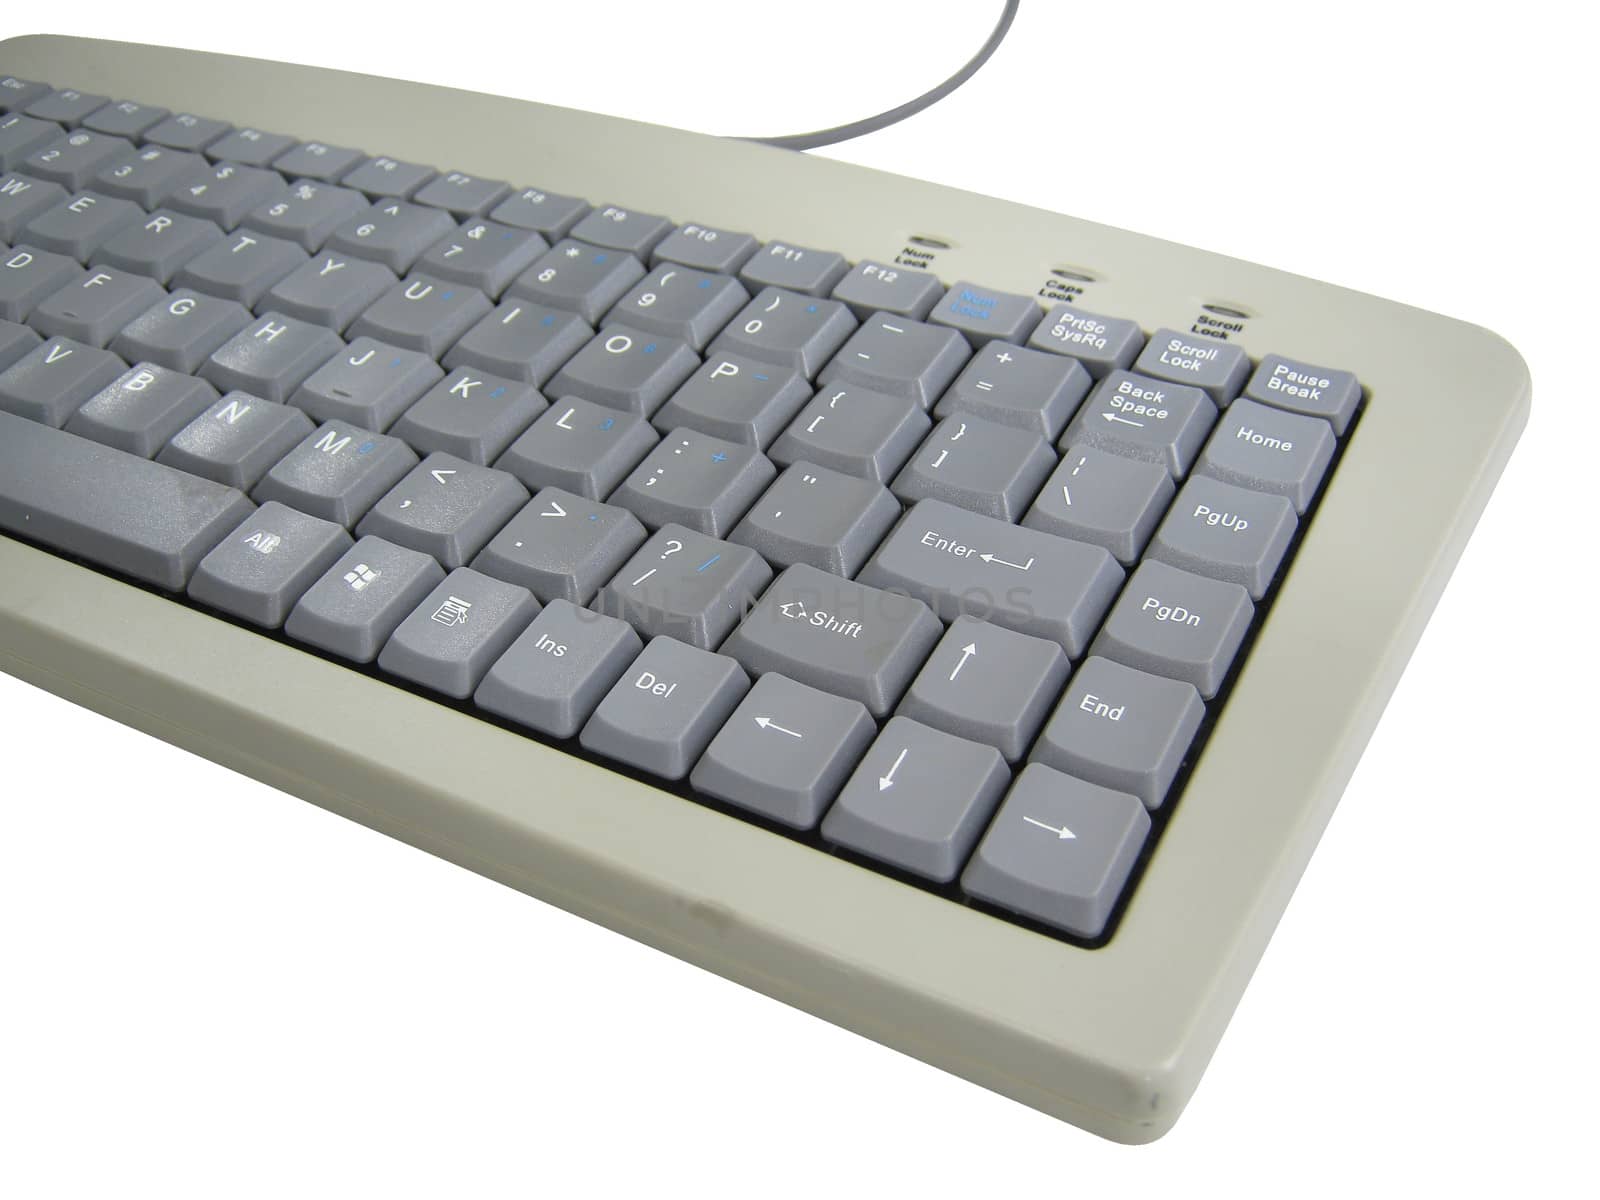 stylish keyboard for the computer by Sorapop